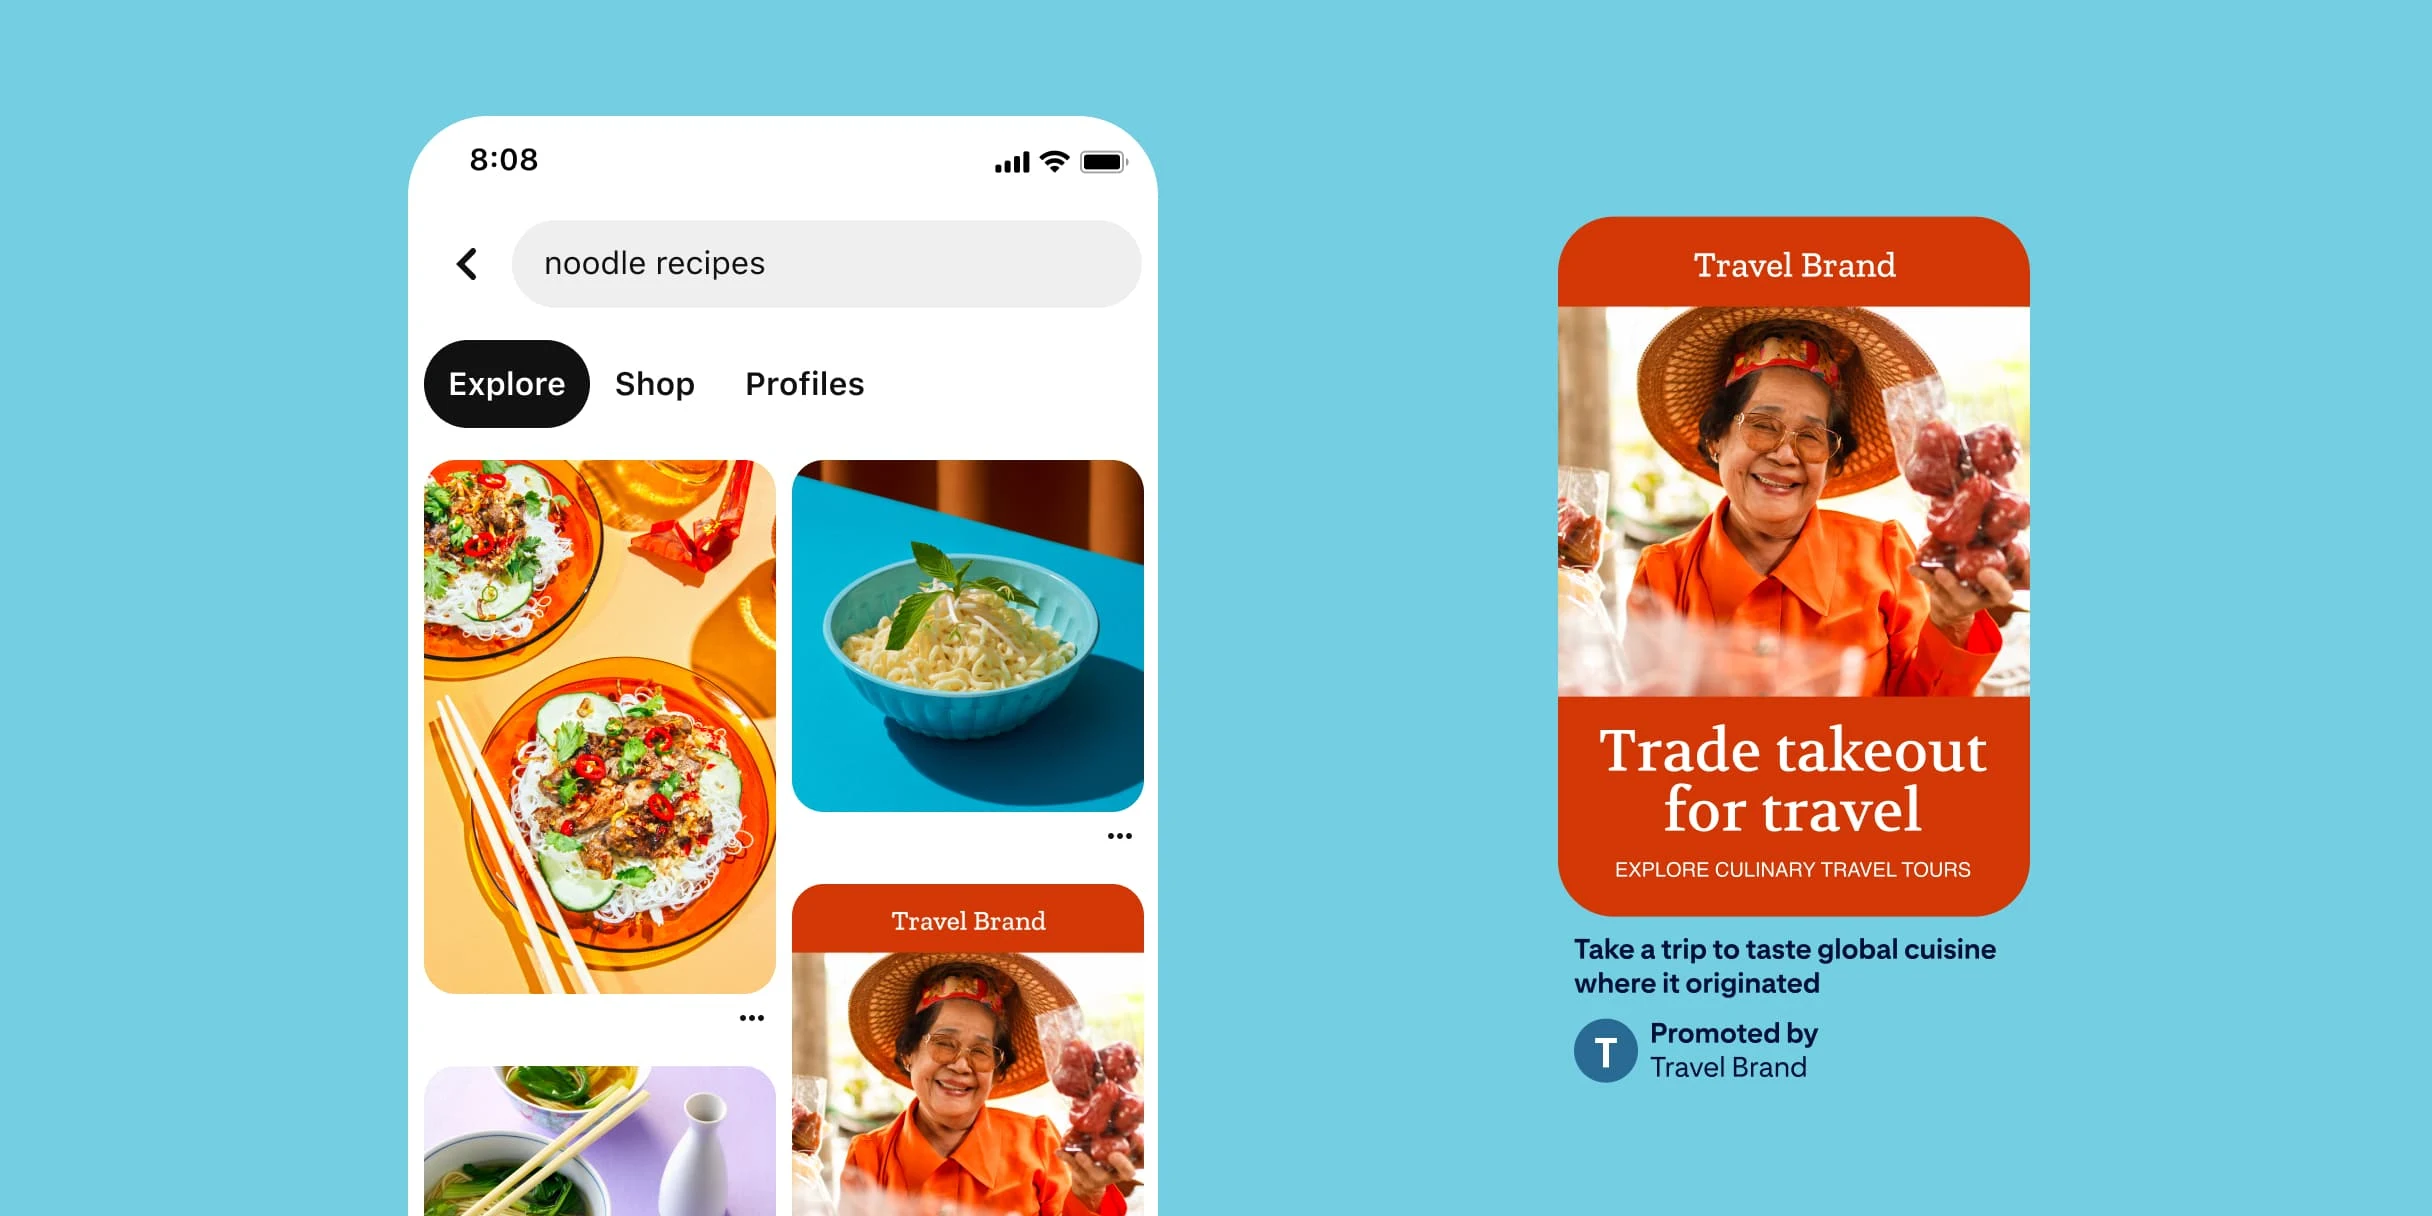 Pinterest search term for noodle recipes. Aerial view of an orange plate with rice noodles and beef on top. A blue bowl with plain noodles topped with sprouts and a mint leaf. A bowl of noodle soup with bok choy leaves and a pair of chopsticks. A Pin showcasing a smiling East Asian woman holding bags of red peppers. The text reads, ‘Trade takeaway for travel. Explore culinary travel tours’. The description underneath reads, ‘Take a trip to explore global cuisine where it originated’.